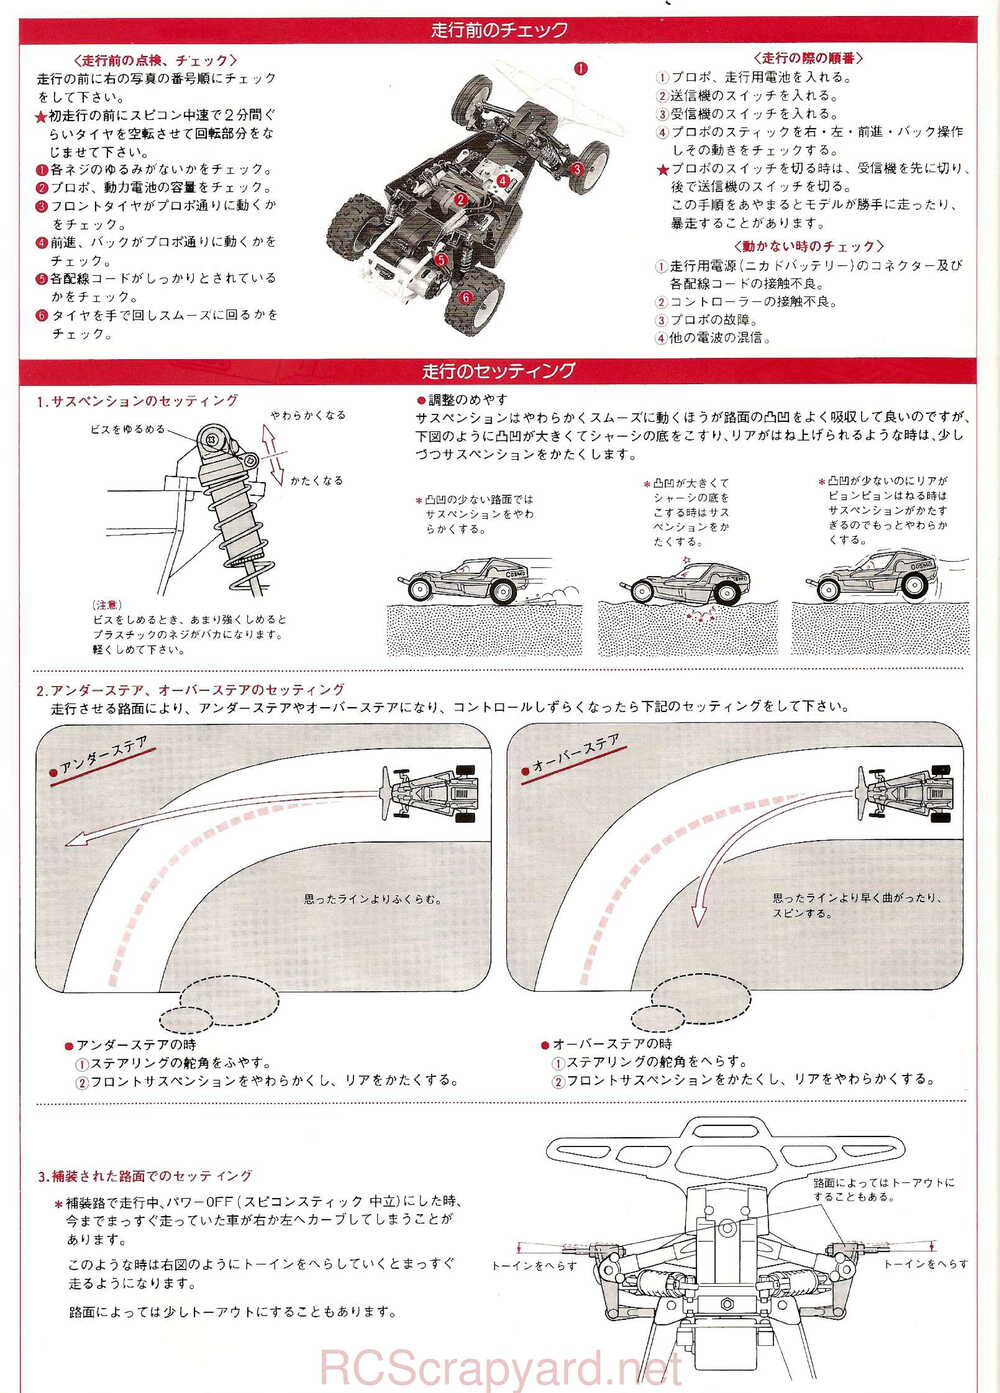 Kyosho - 3084 - Cosmo - Manual - Page 14